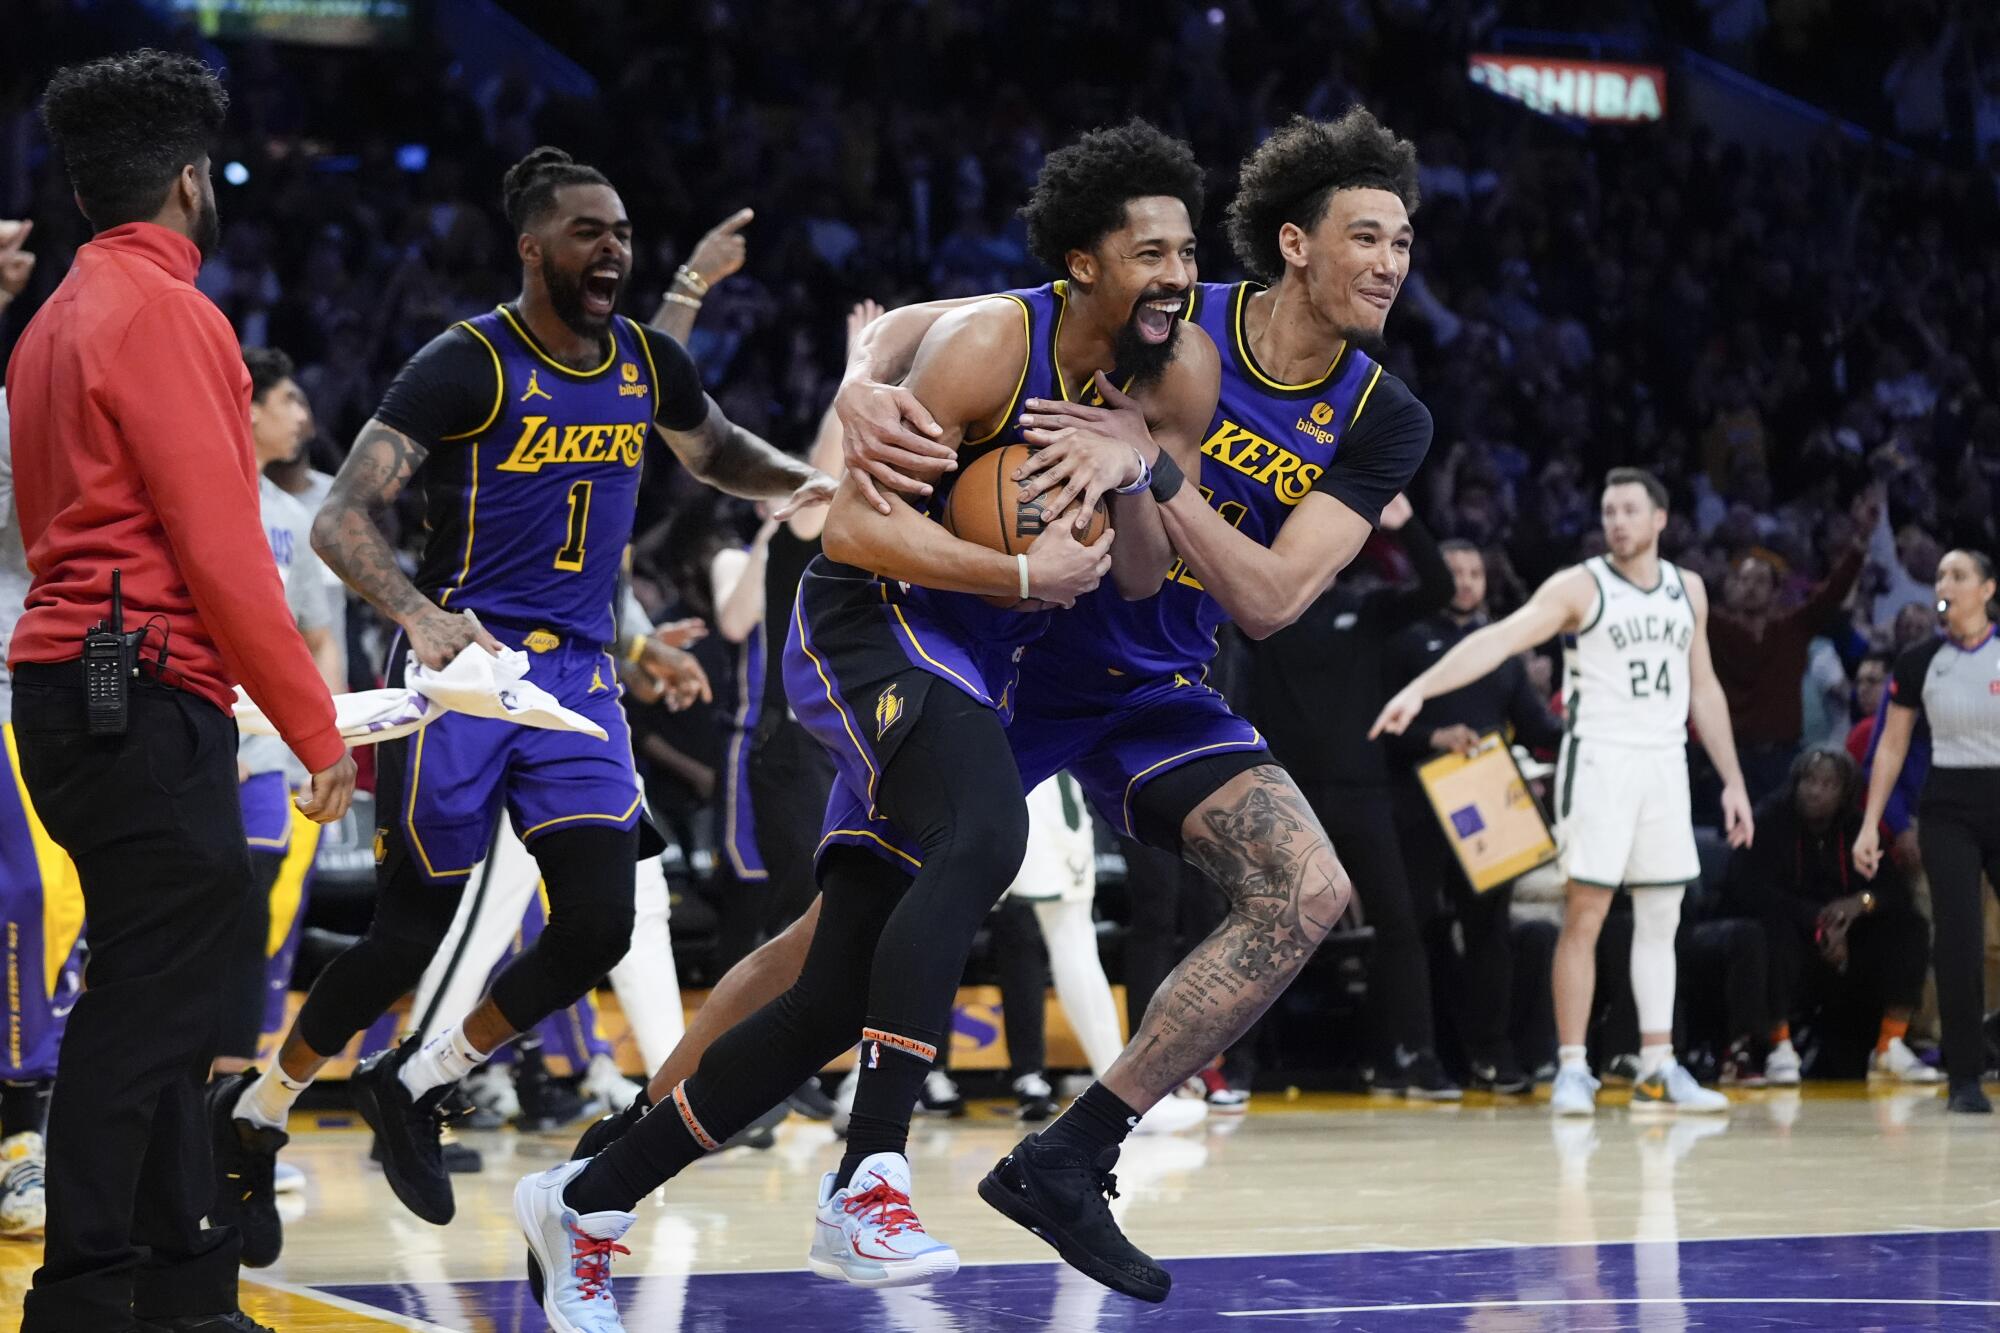 Lakers teammates Jaxson Hayes, right, Spencer Dinwiddie, center, and D'Angelo Russell celebrate their win over the Bucks.